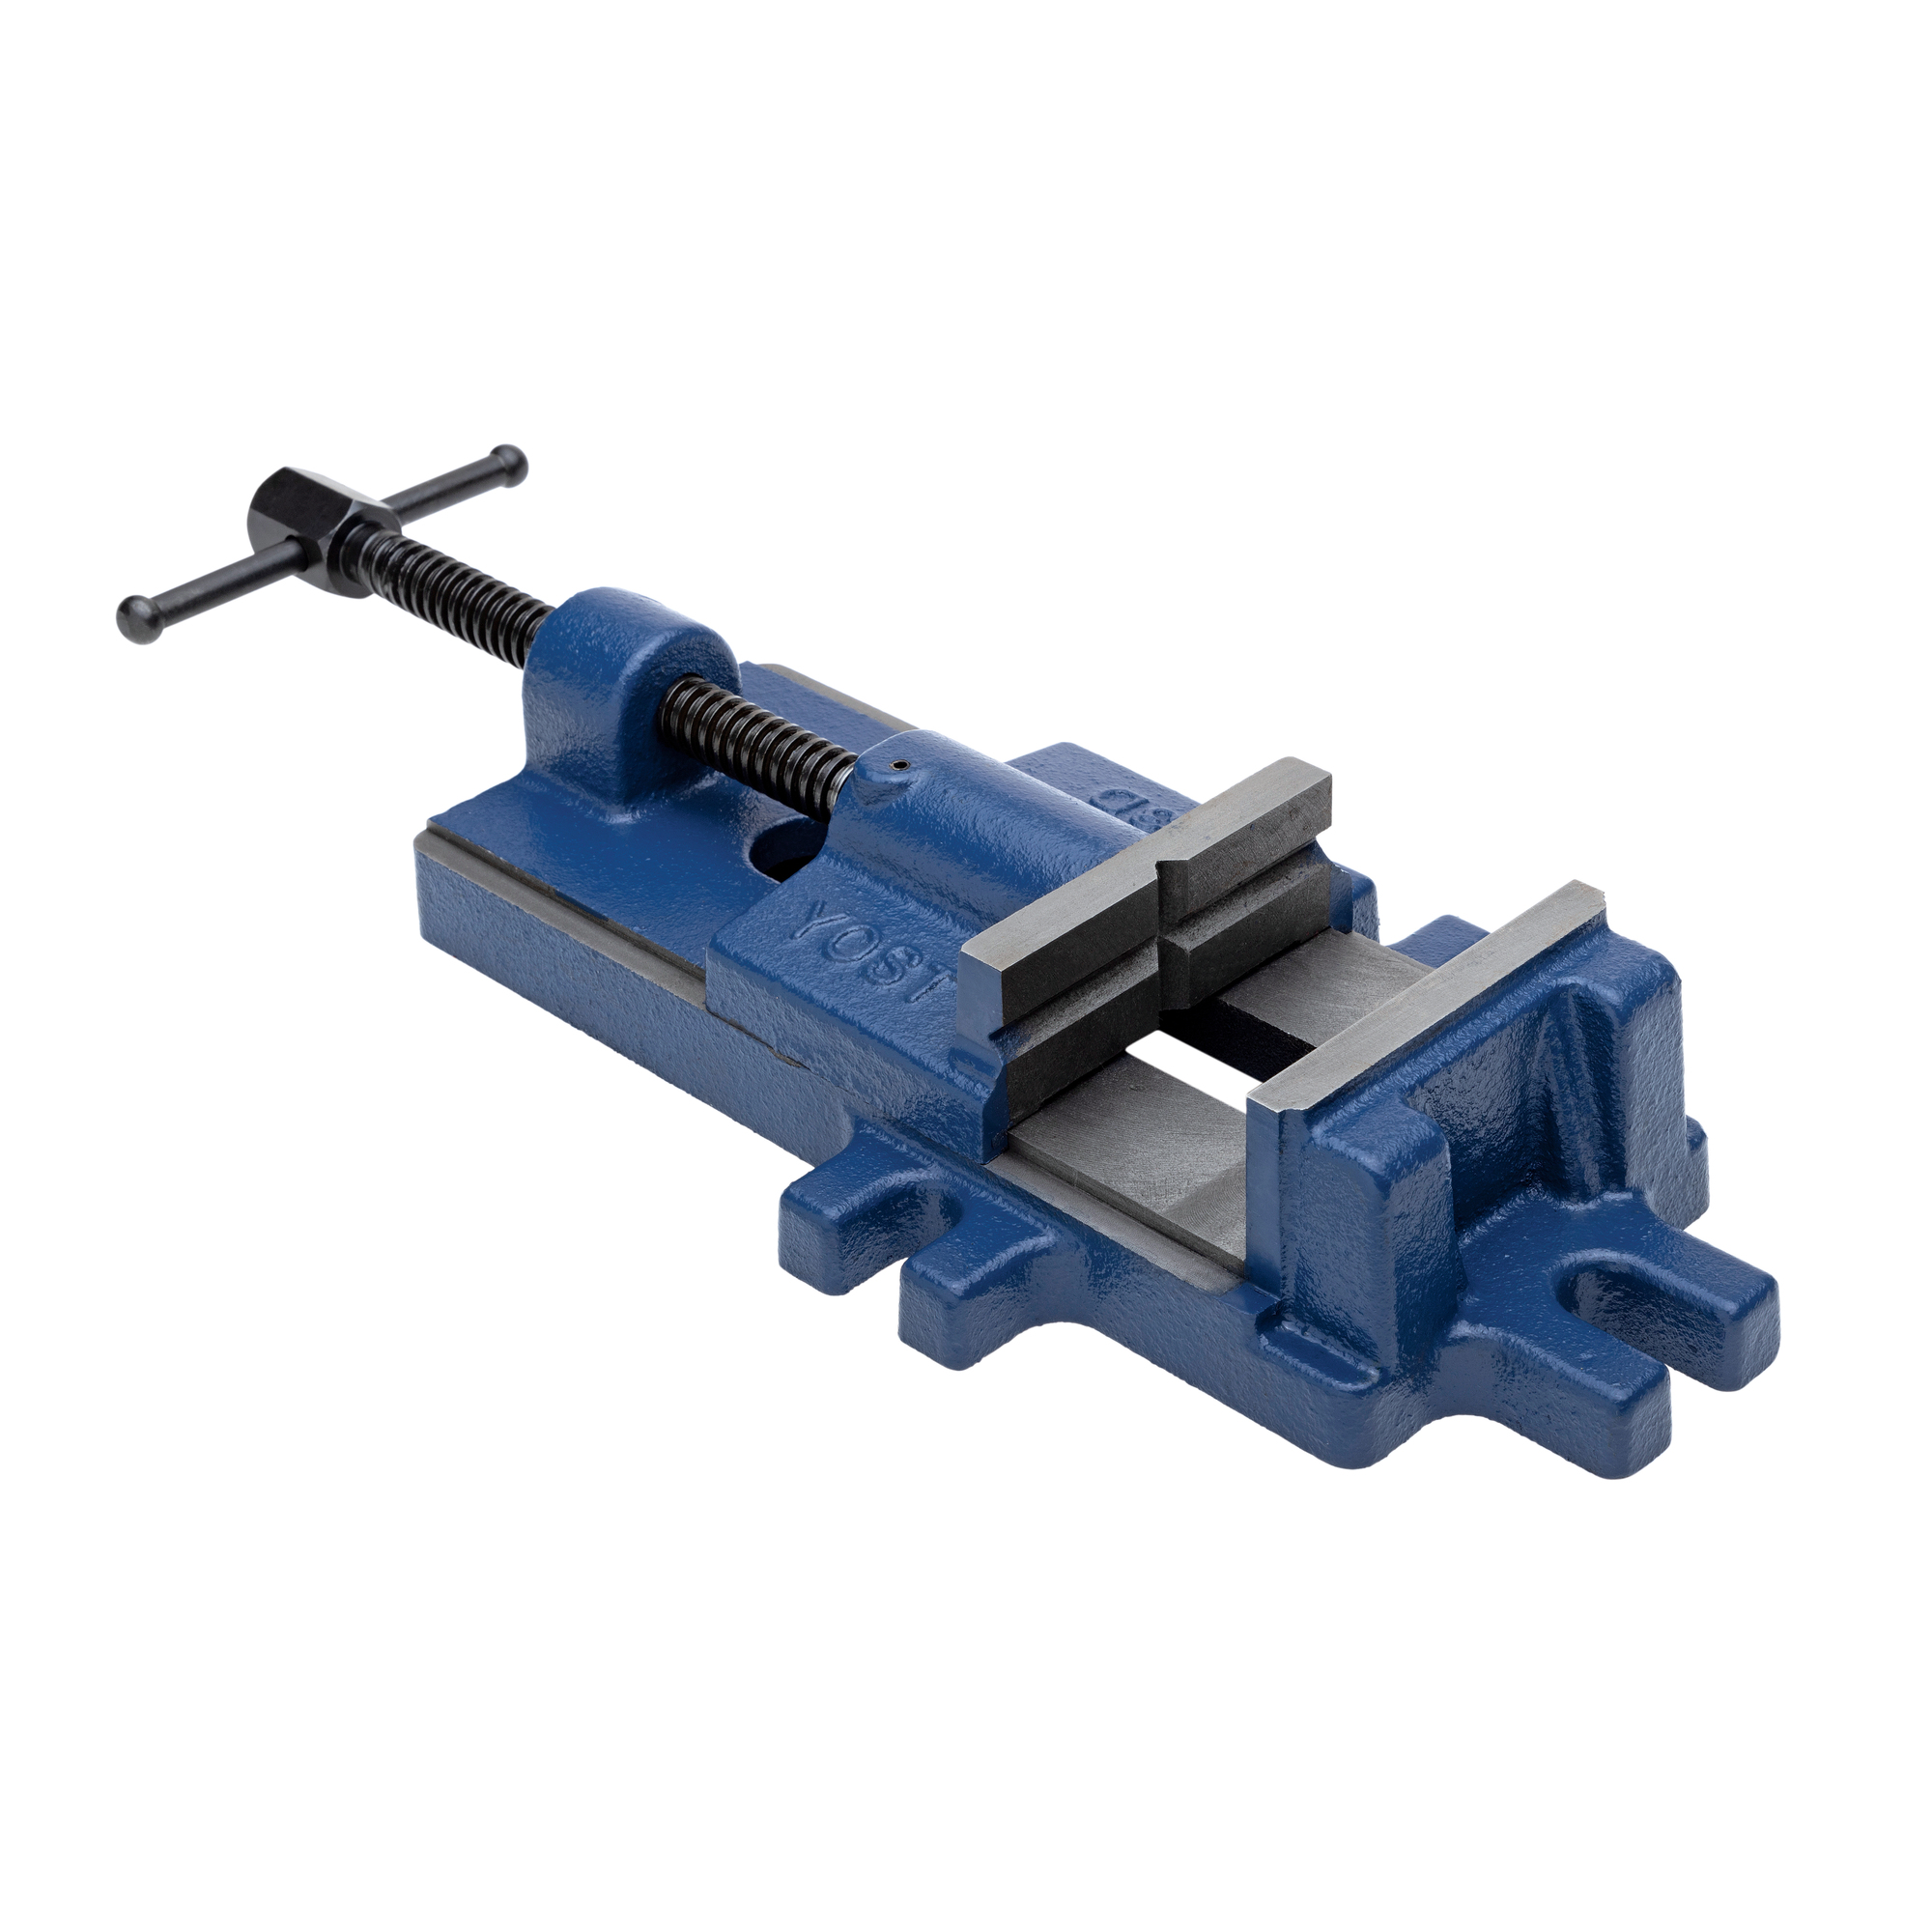 Yost Vises, 3.5Inch Drill Press Vise, Jaw Width 3.5 in, Jaw Capacity 4 in, Material Iron, Model 3D -  56435